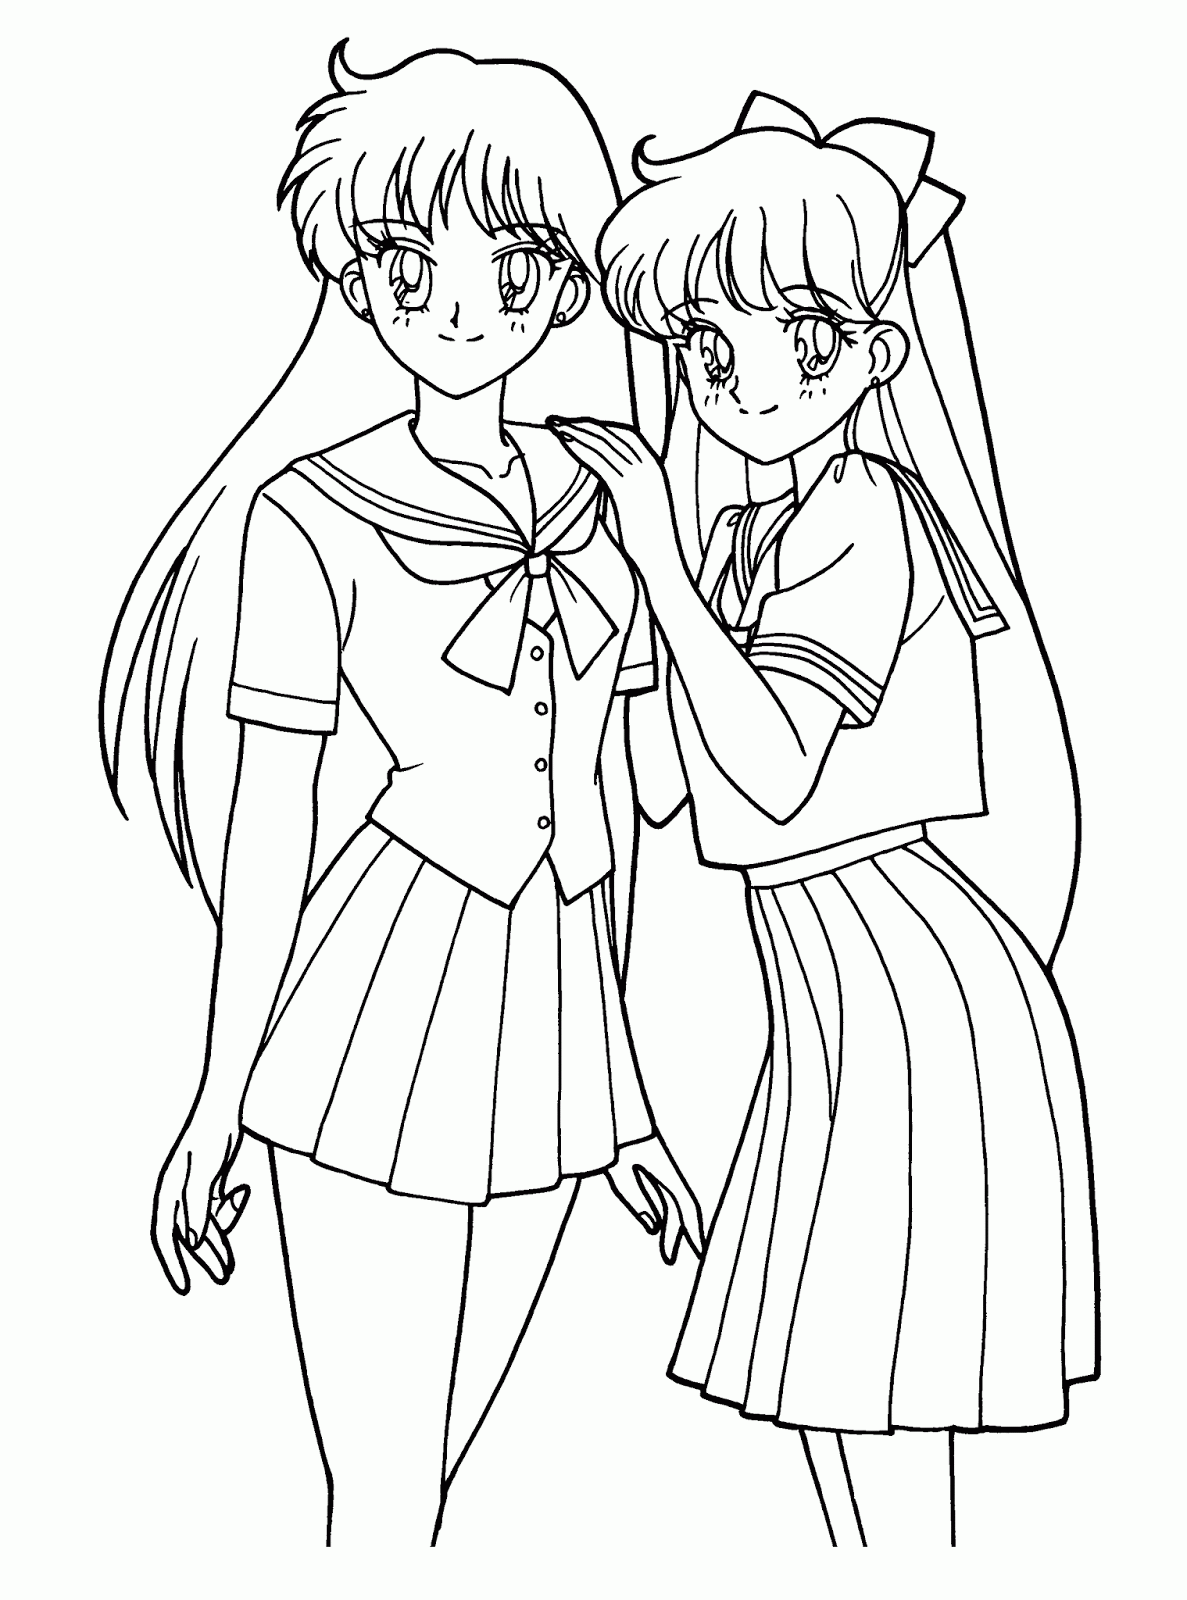 Free Cute Anime Face Girls Coloring Pages, Download Free Cute Anime